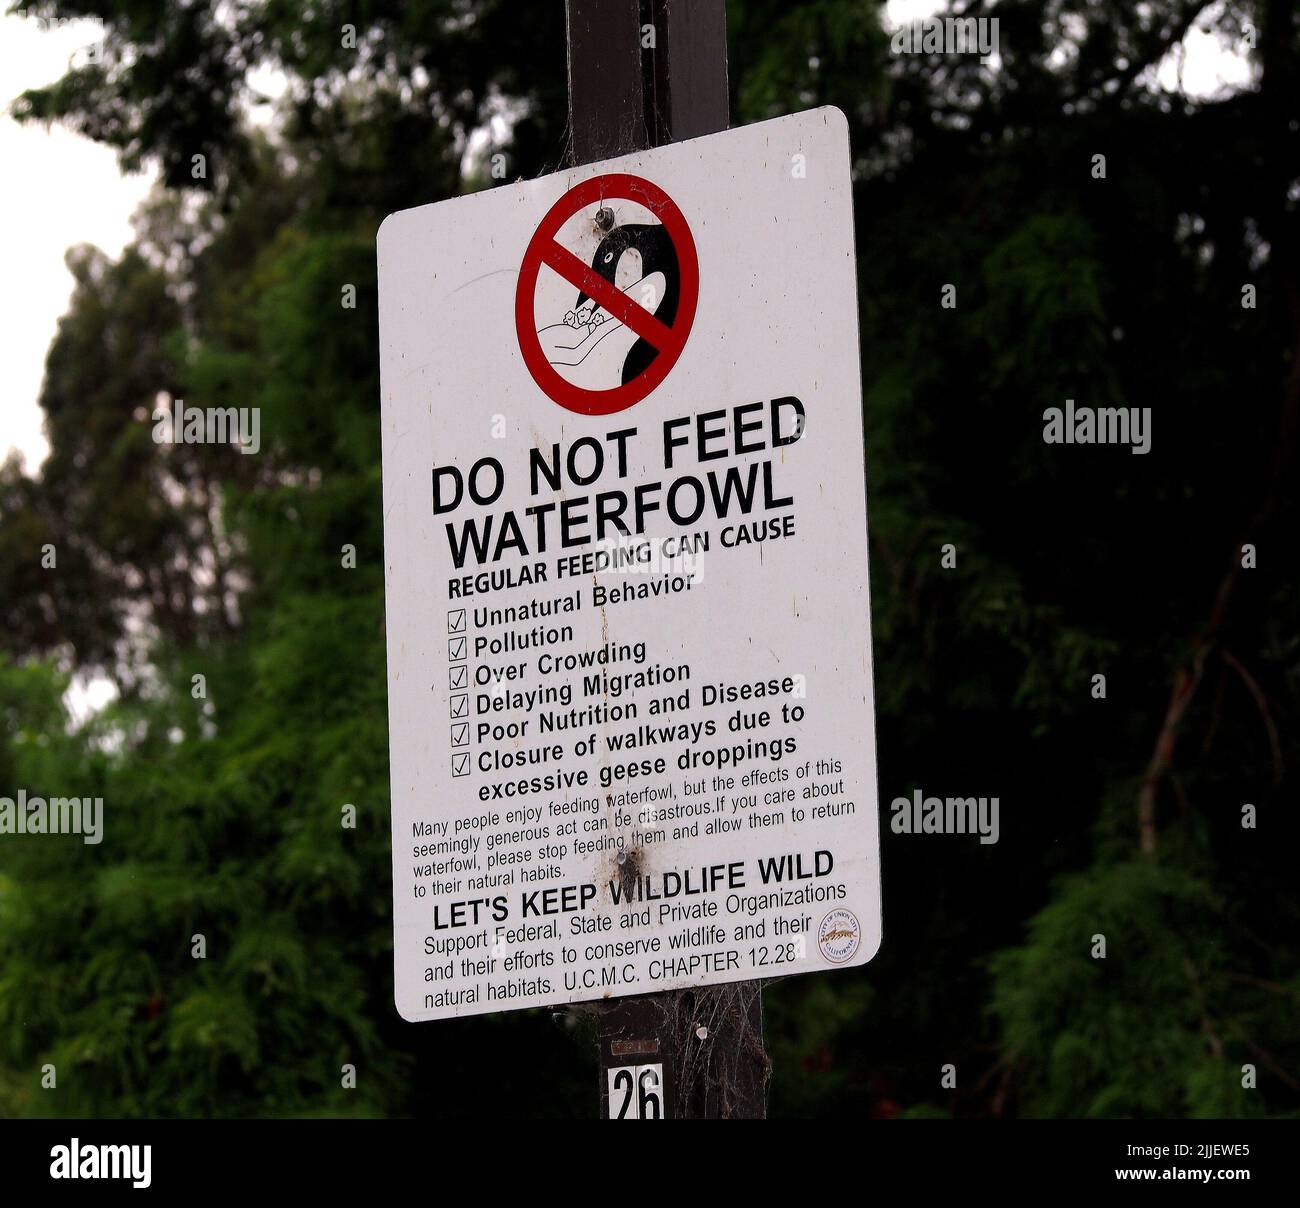 do not feed the waterfowl sign in William Cann Civic Center in Union City, California Stock Photo